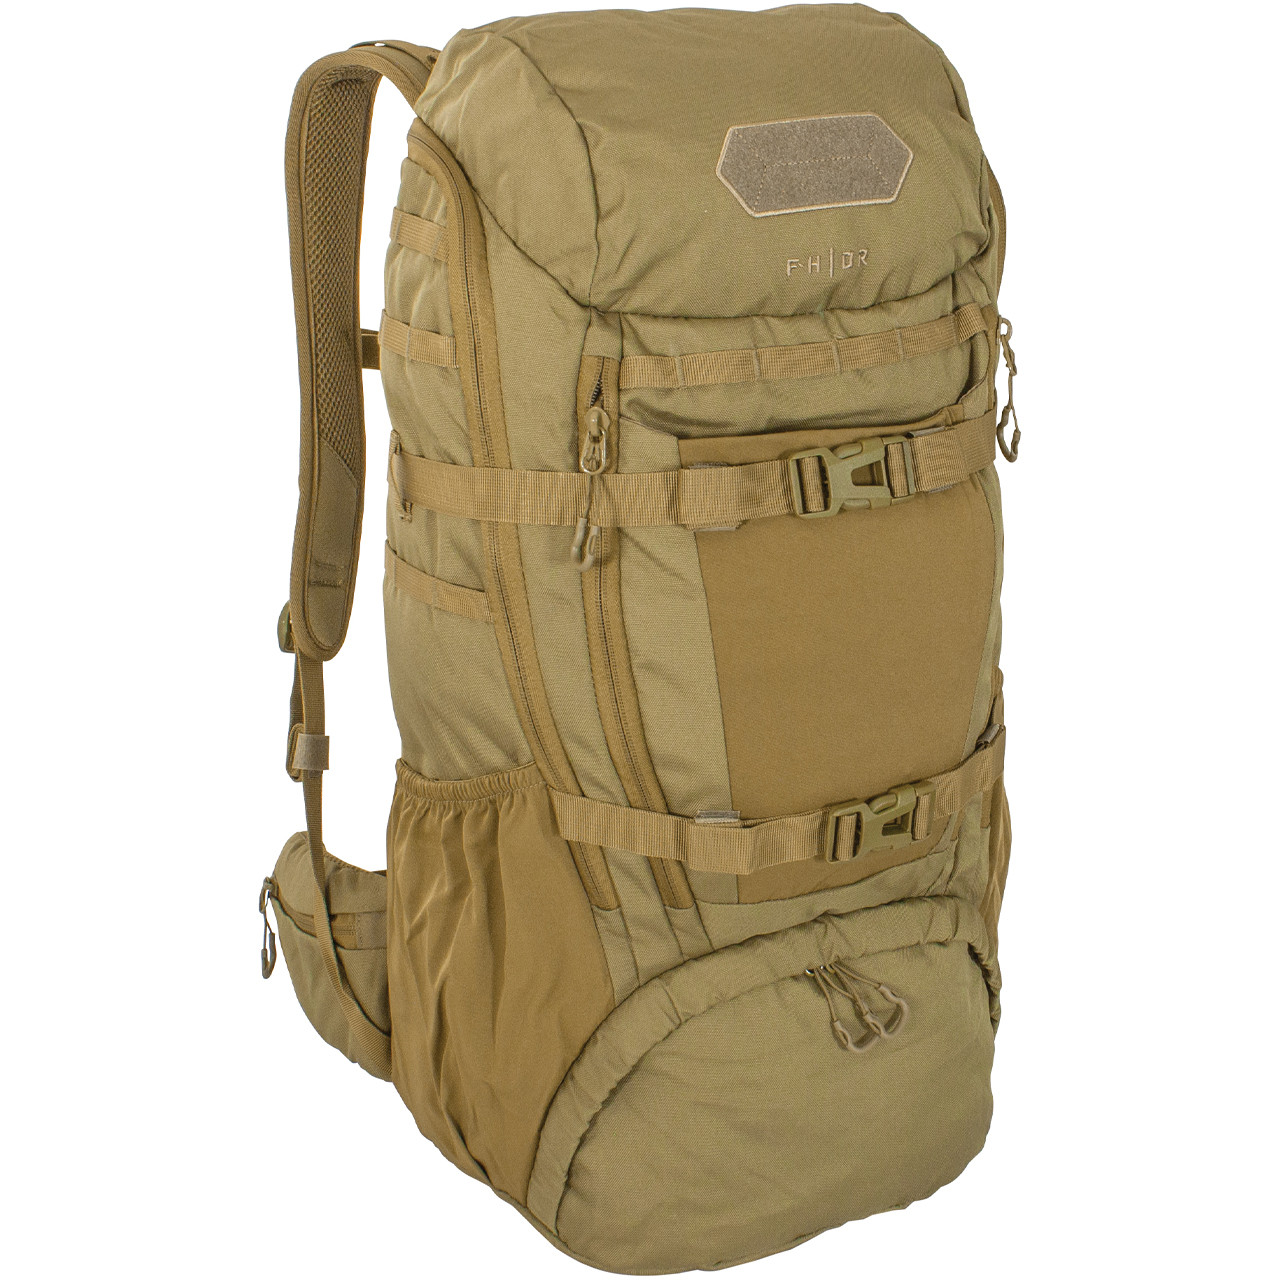 FHIOR - 40 Liter Tactical Pack - Coyote